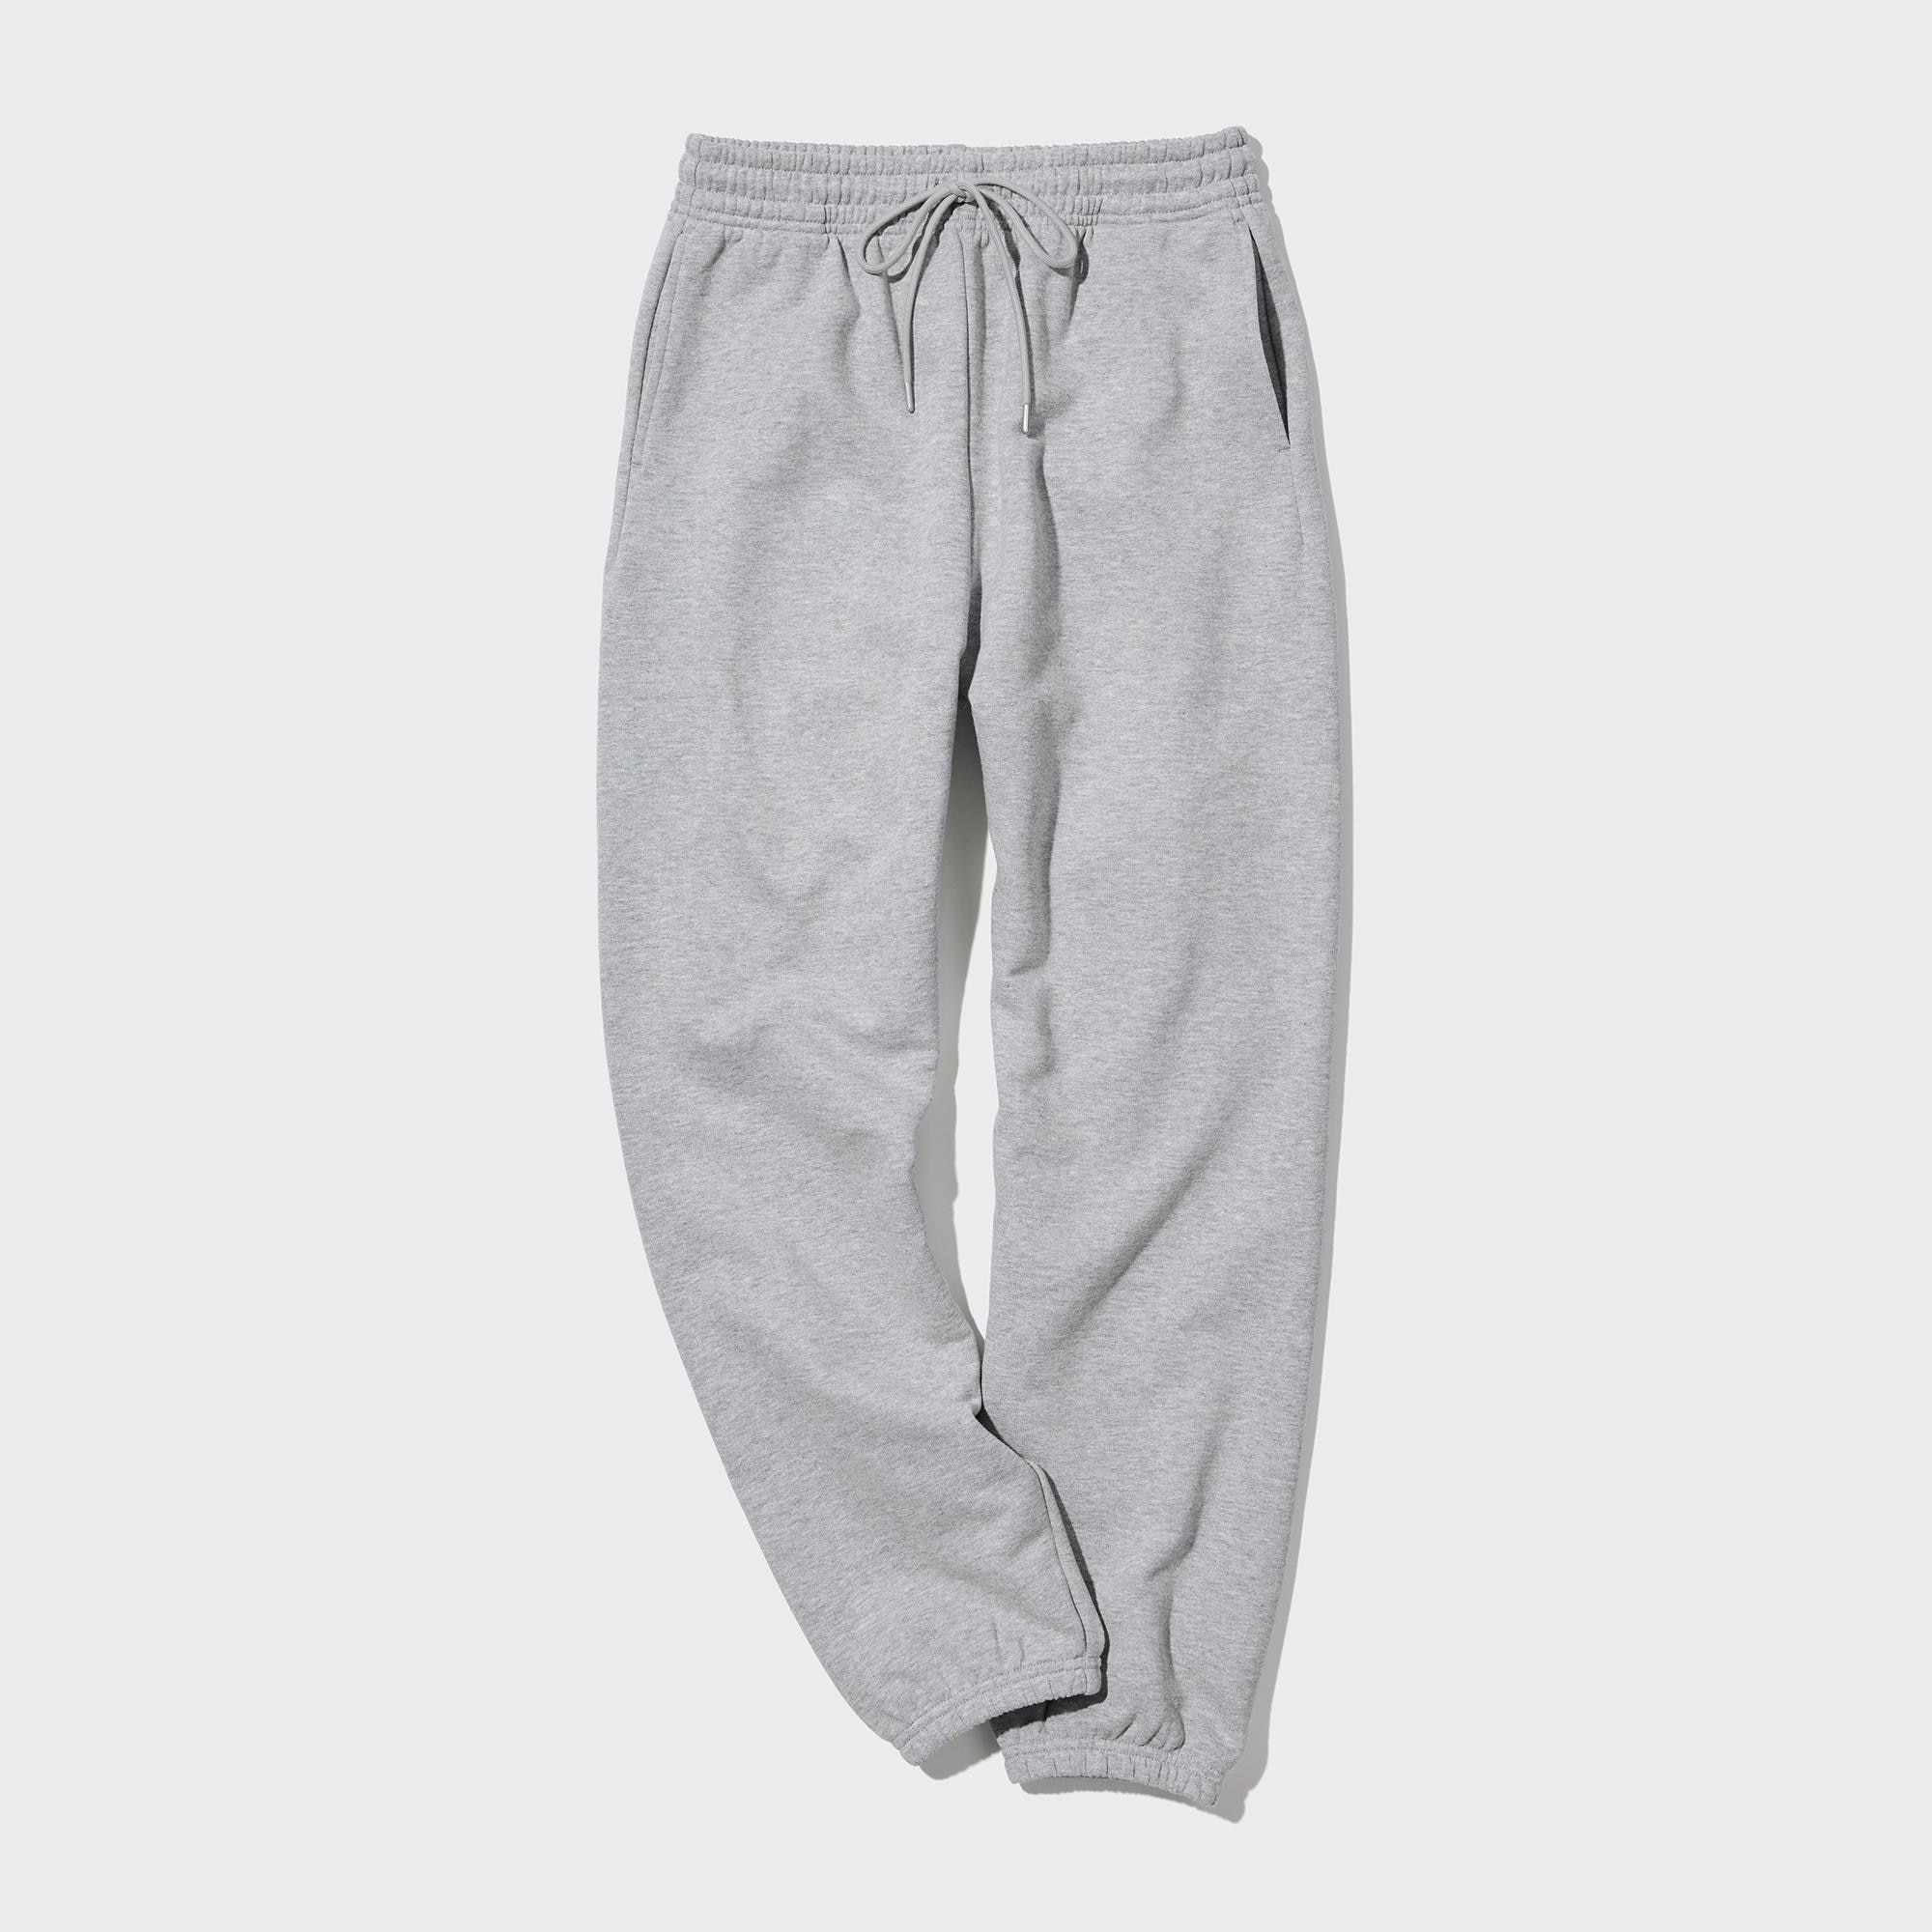 Buy Grey Track Pants for Men by G STAR RAW Online | Ajio.com